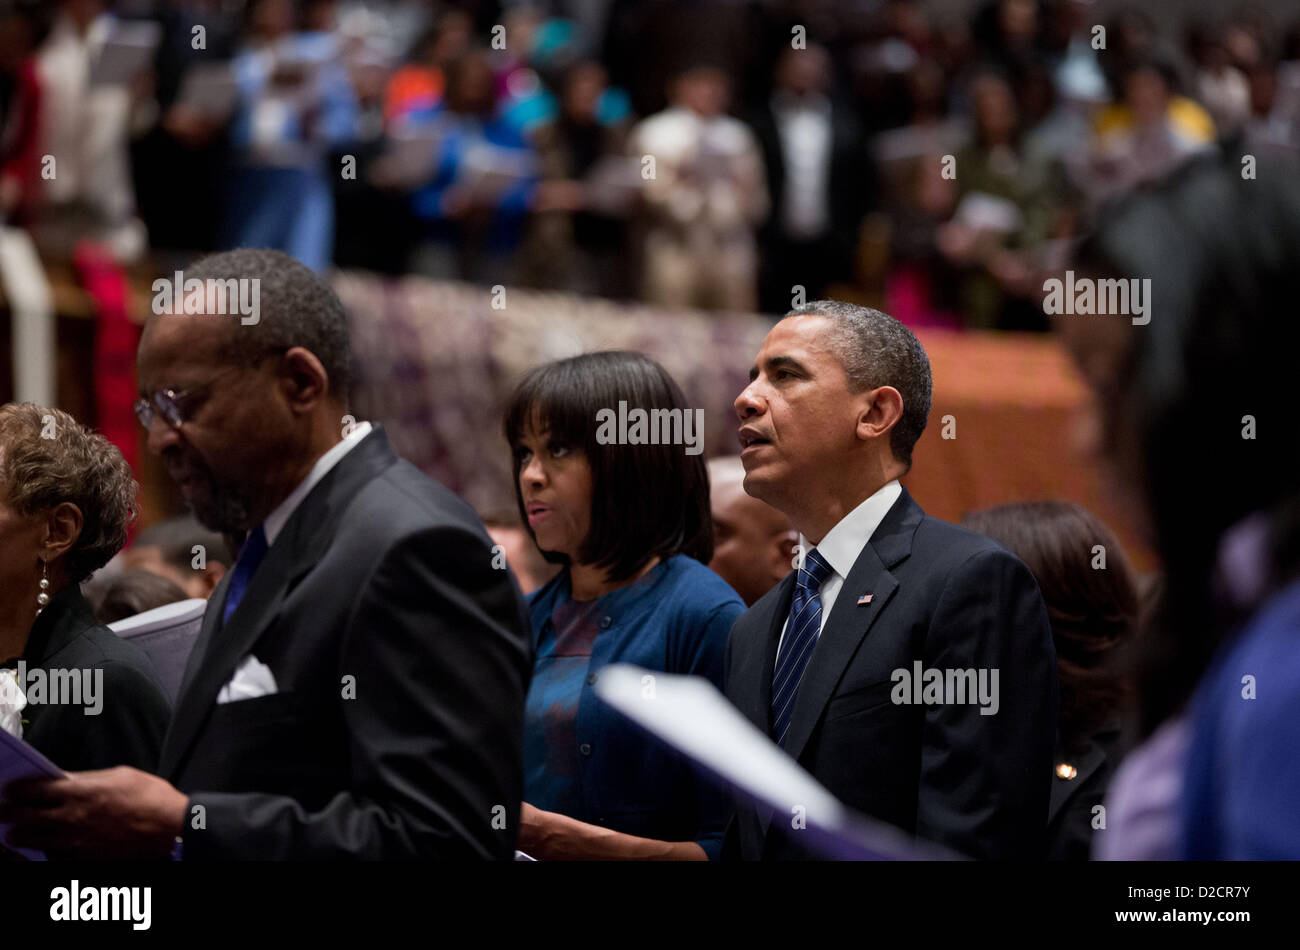 United States President Barack Obama and First Lady Michelle Obama attend a church service at Metropolitan African Methodist Episcopal Church in Washington, D.C., on Inauguration Day, Sunday, Jan. 20, 2013. .Mandatory Credit: Pete Souza - White House via CNP Stock Photo